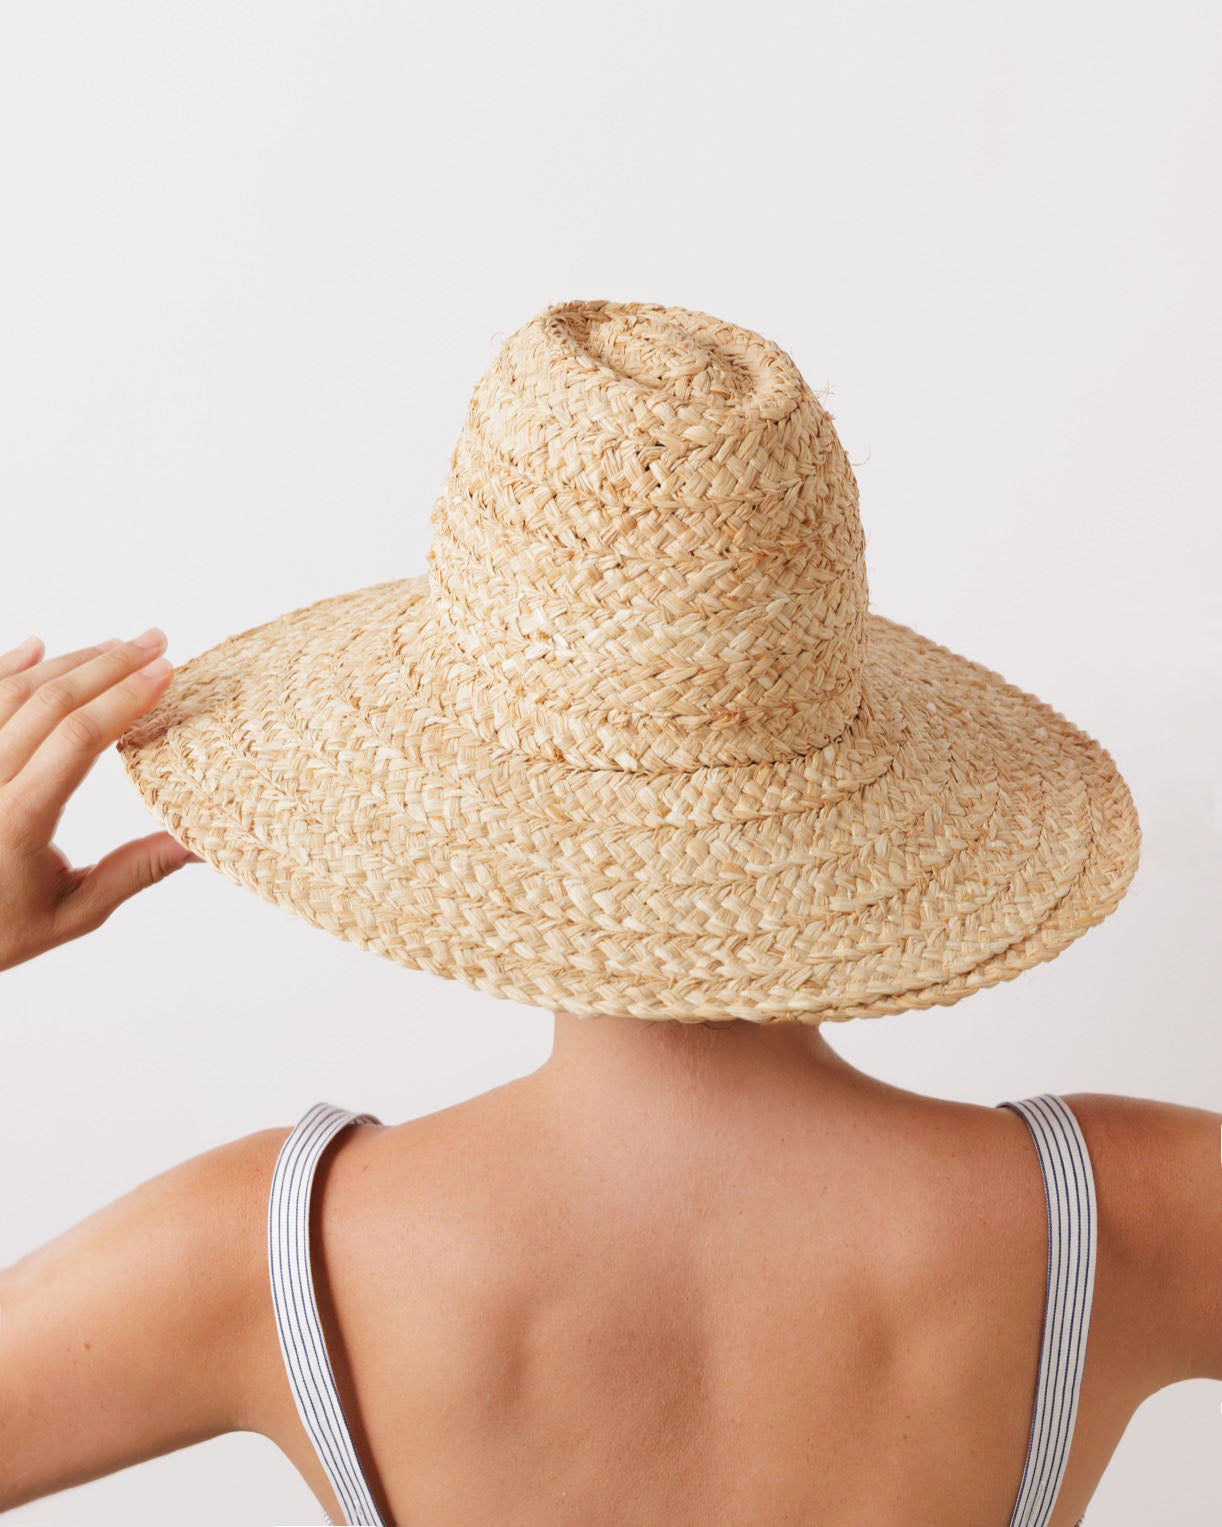 A person seen from behind wearing a wide-brimmed raffia hat (Fiscolo, Natural) by Lola Hats, with a hint of striped clothing visible on the shoulders.